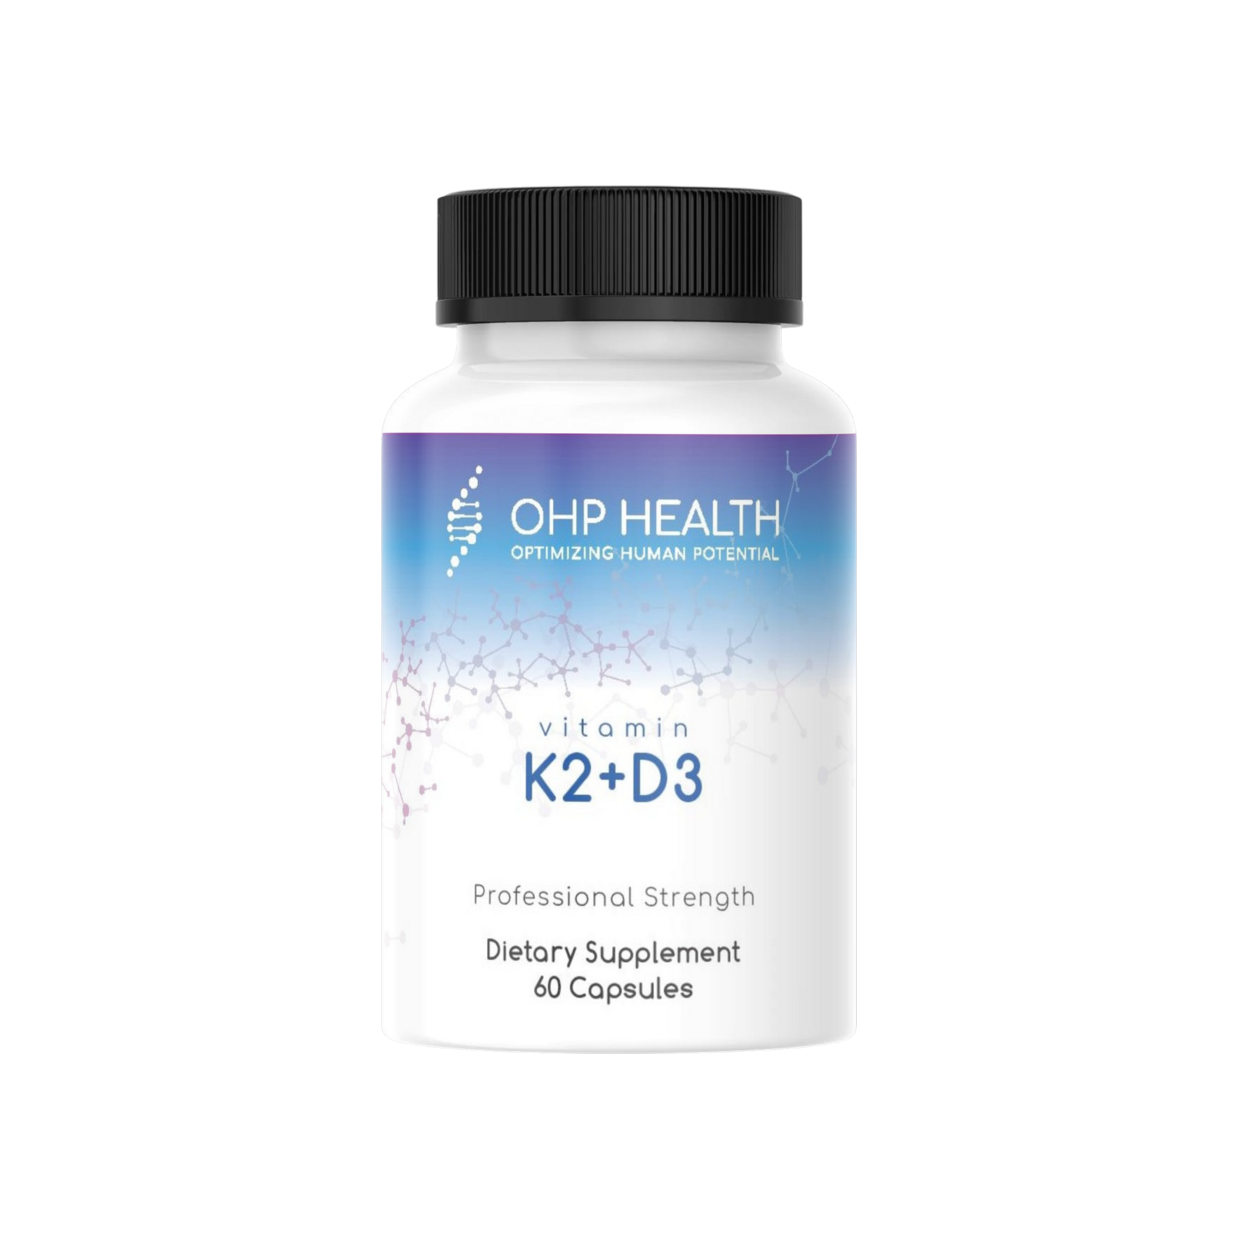 A bottle of K2+D3 Vitamin | 60 count with a black background from OHP Health.